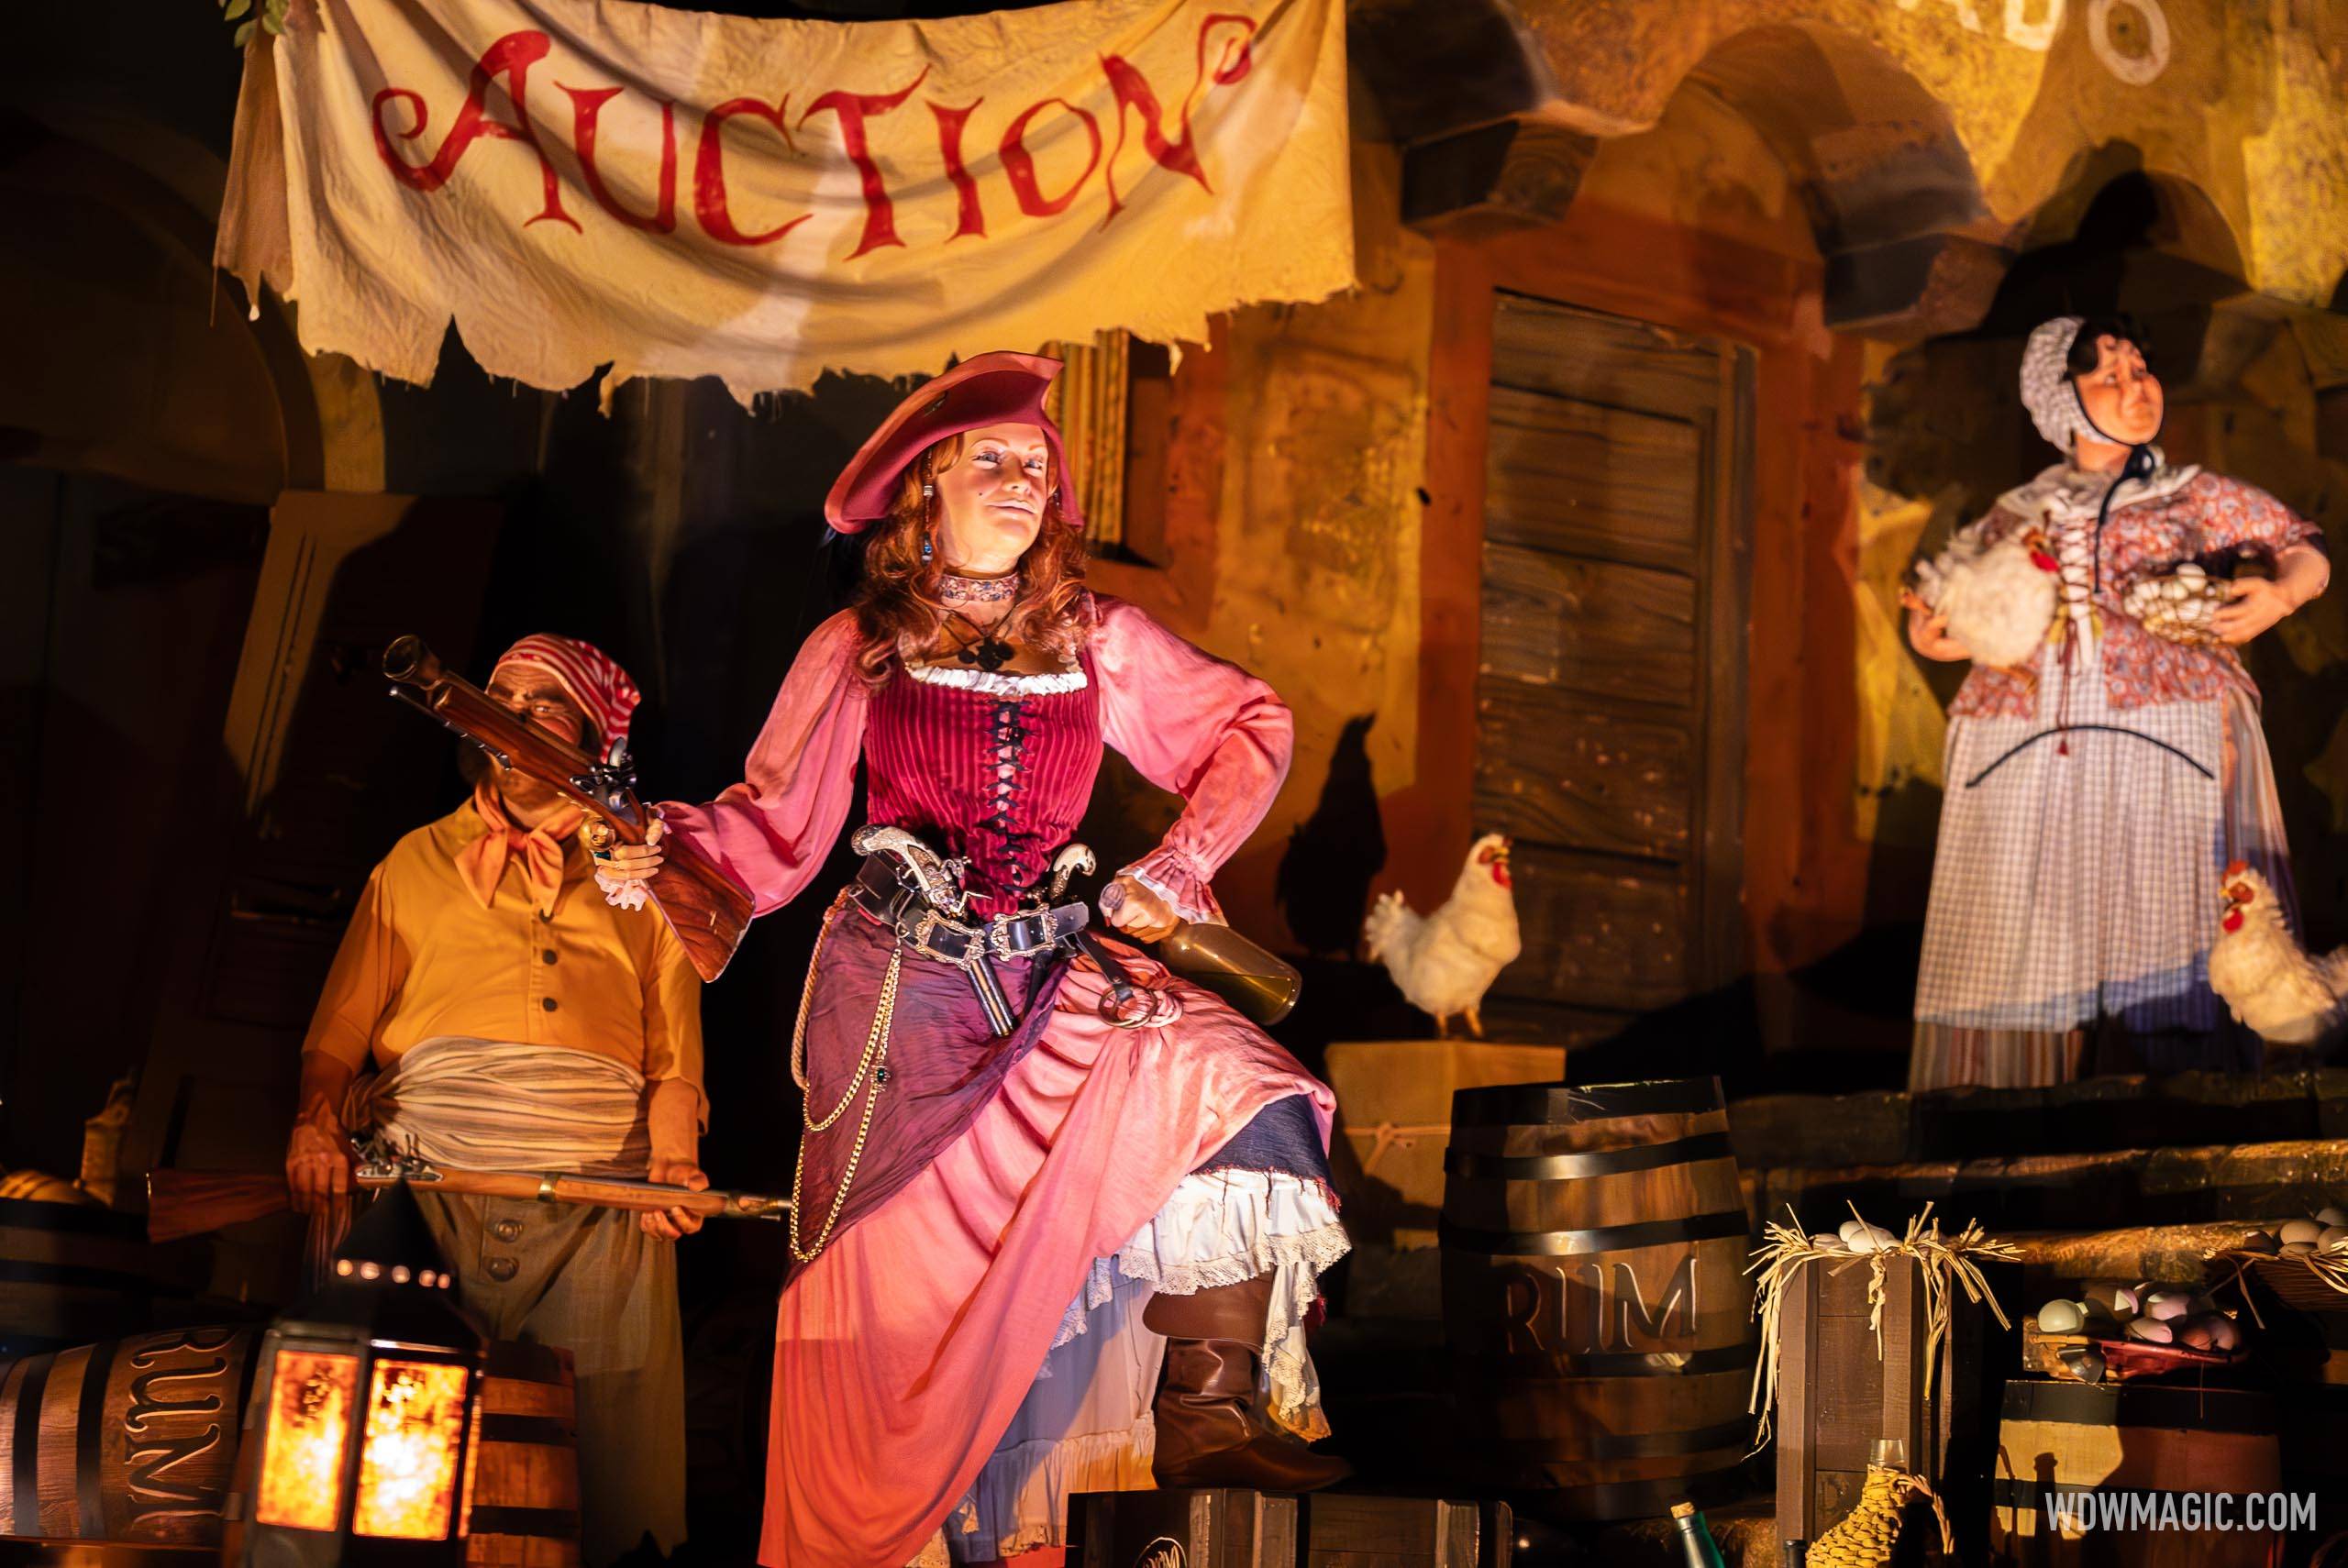 Captain Jack Sparrow's Pirate Tutorial closing at the end of the month